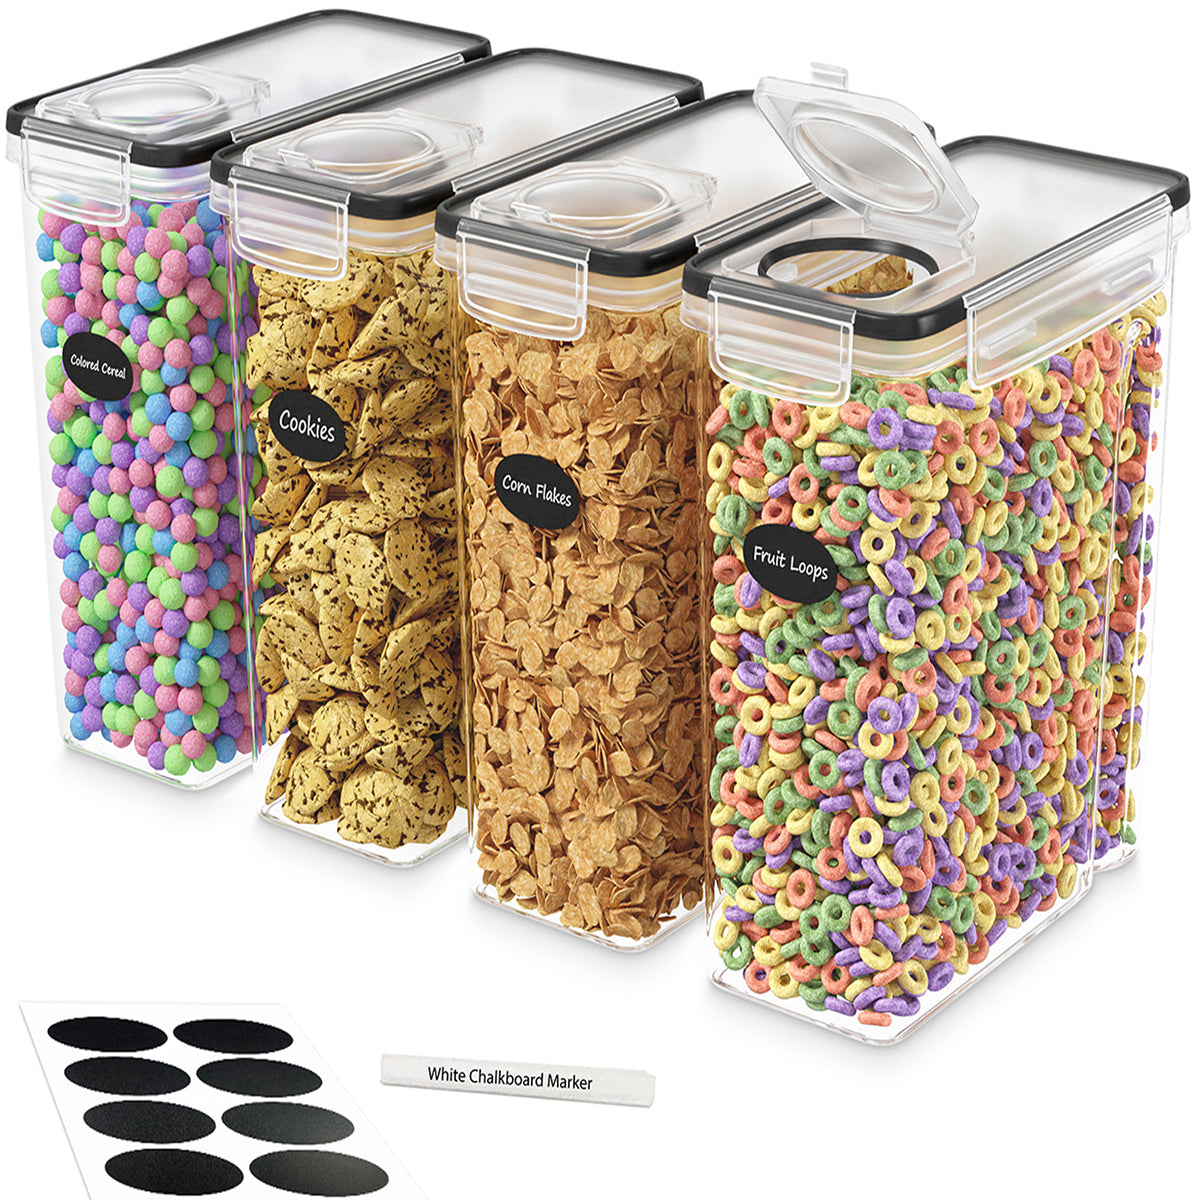 8 Pieces Fruit Storage Containers, Food Containers